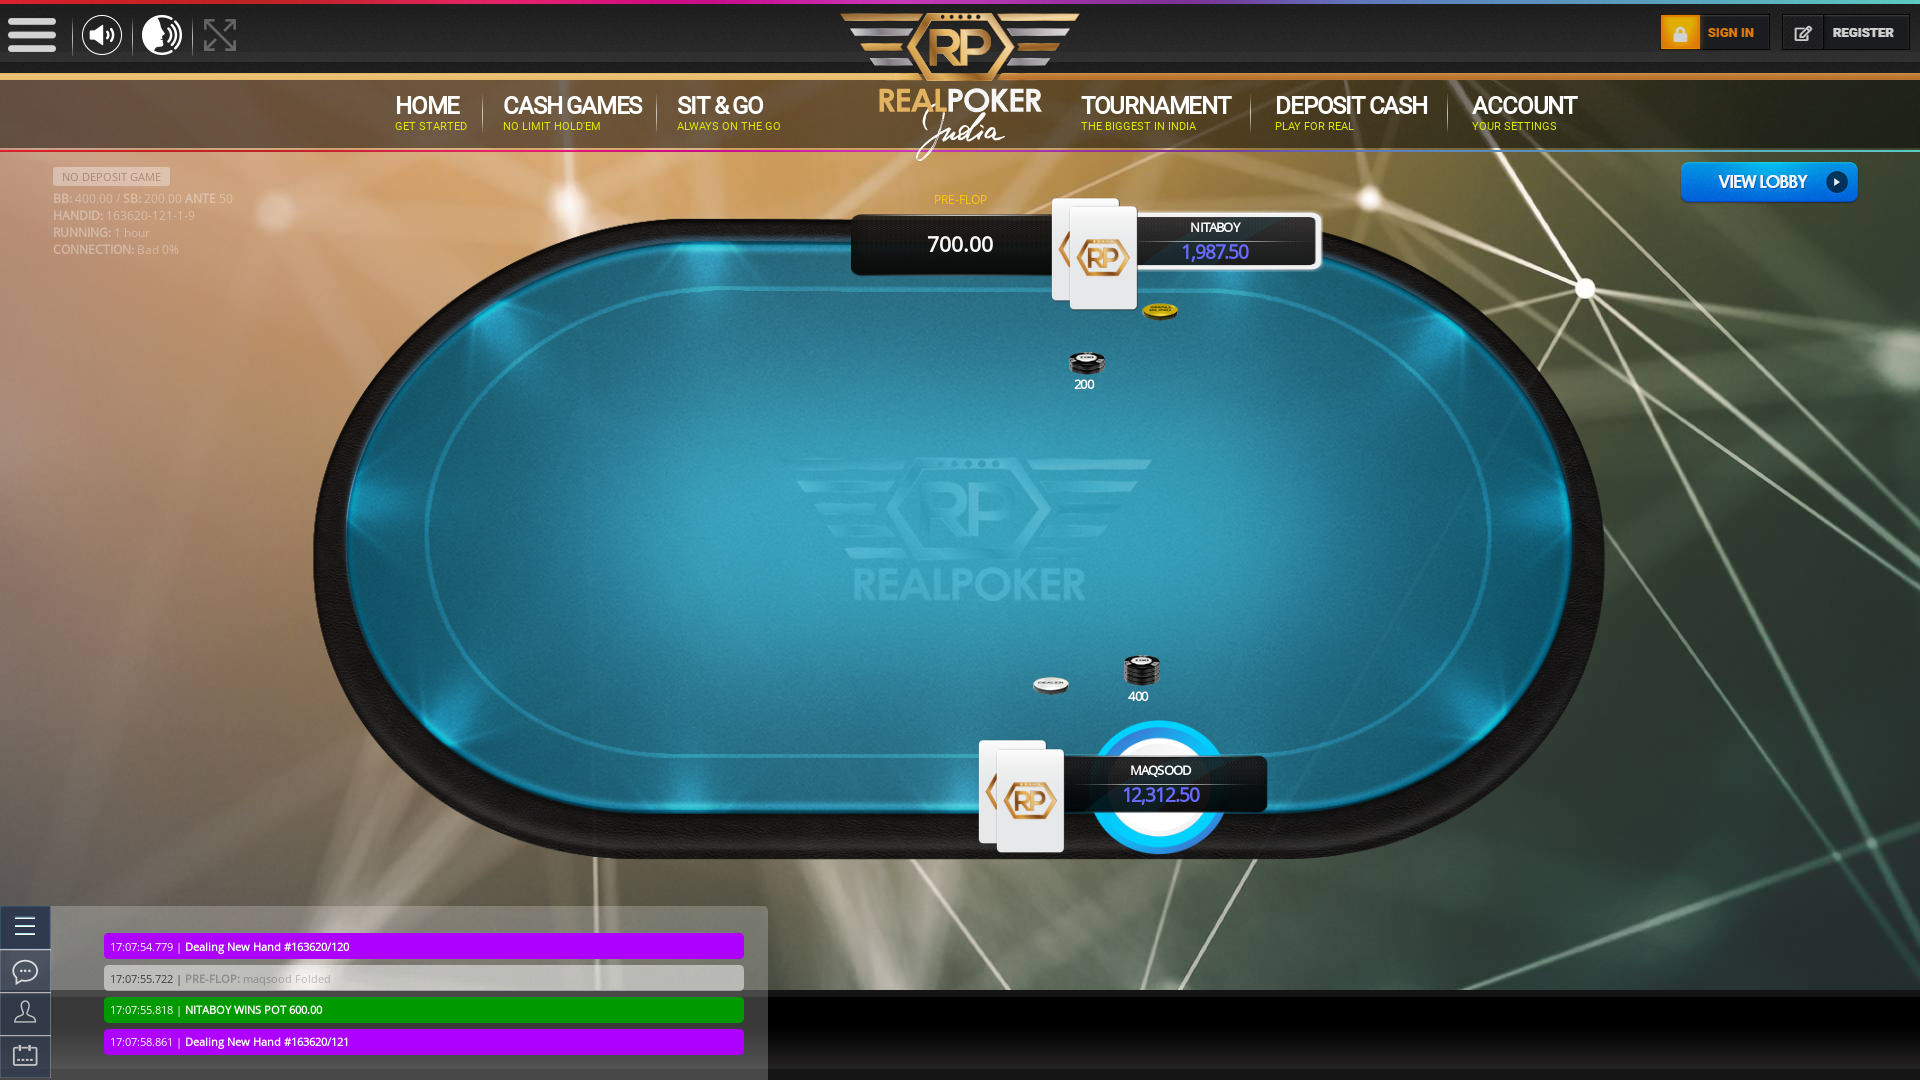 Real poker 10 player table in the 64th minute